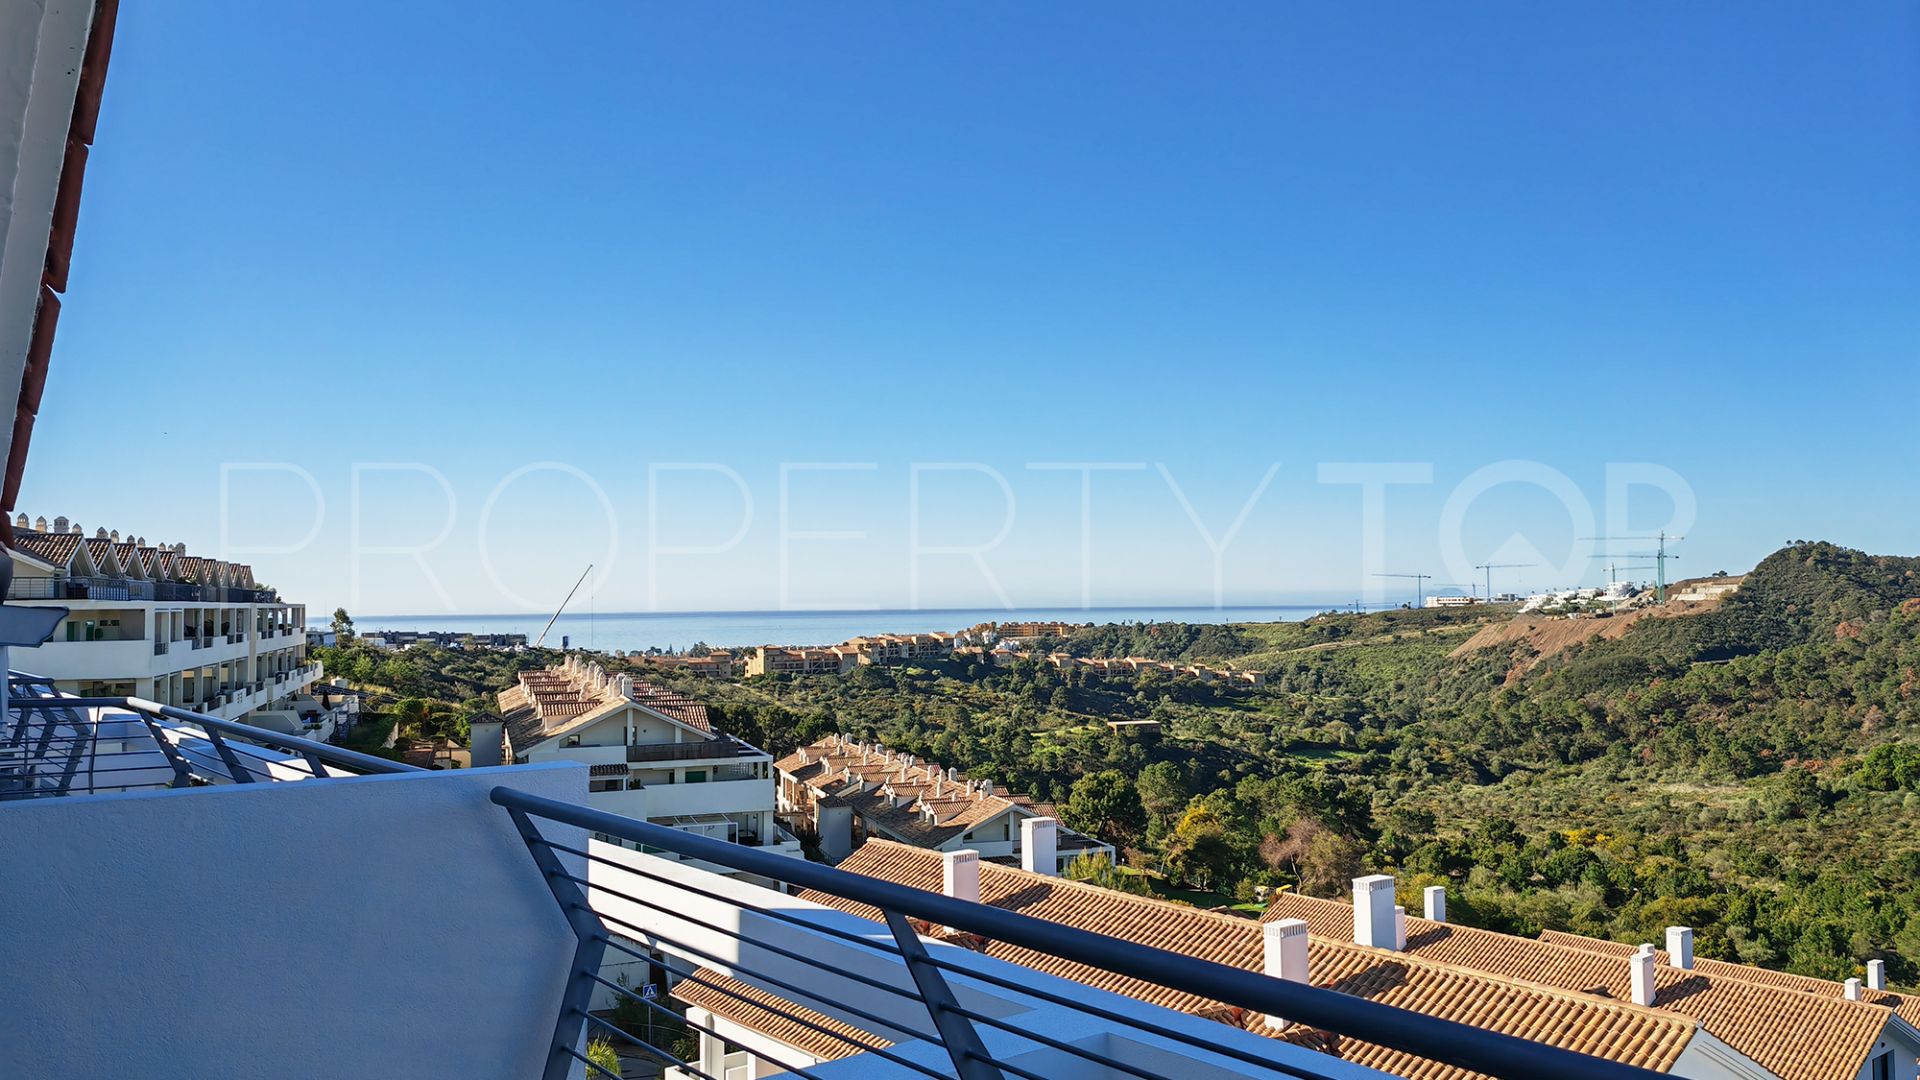 2 bedrooms duplex penthouse in Selwo for sale